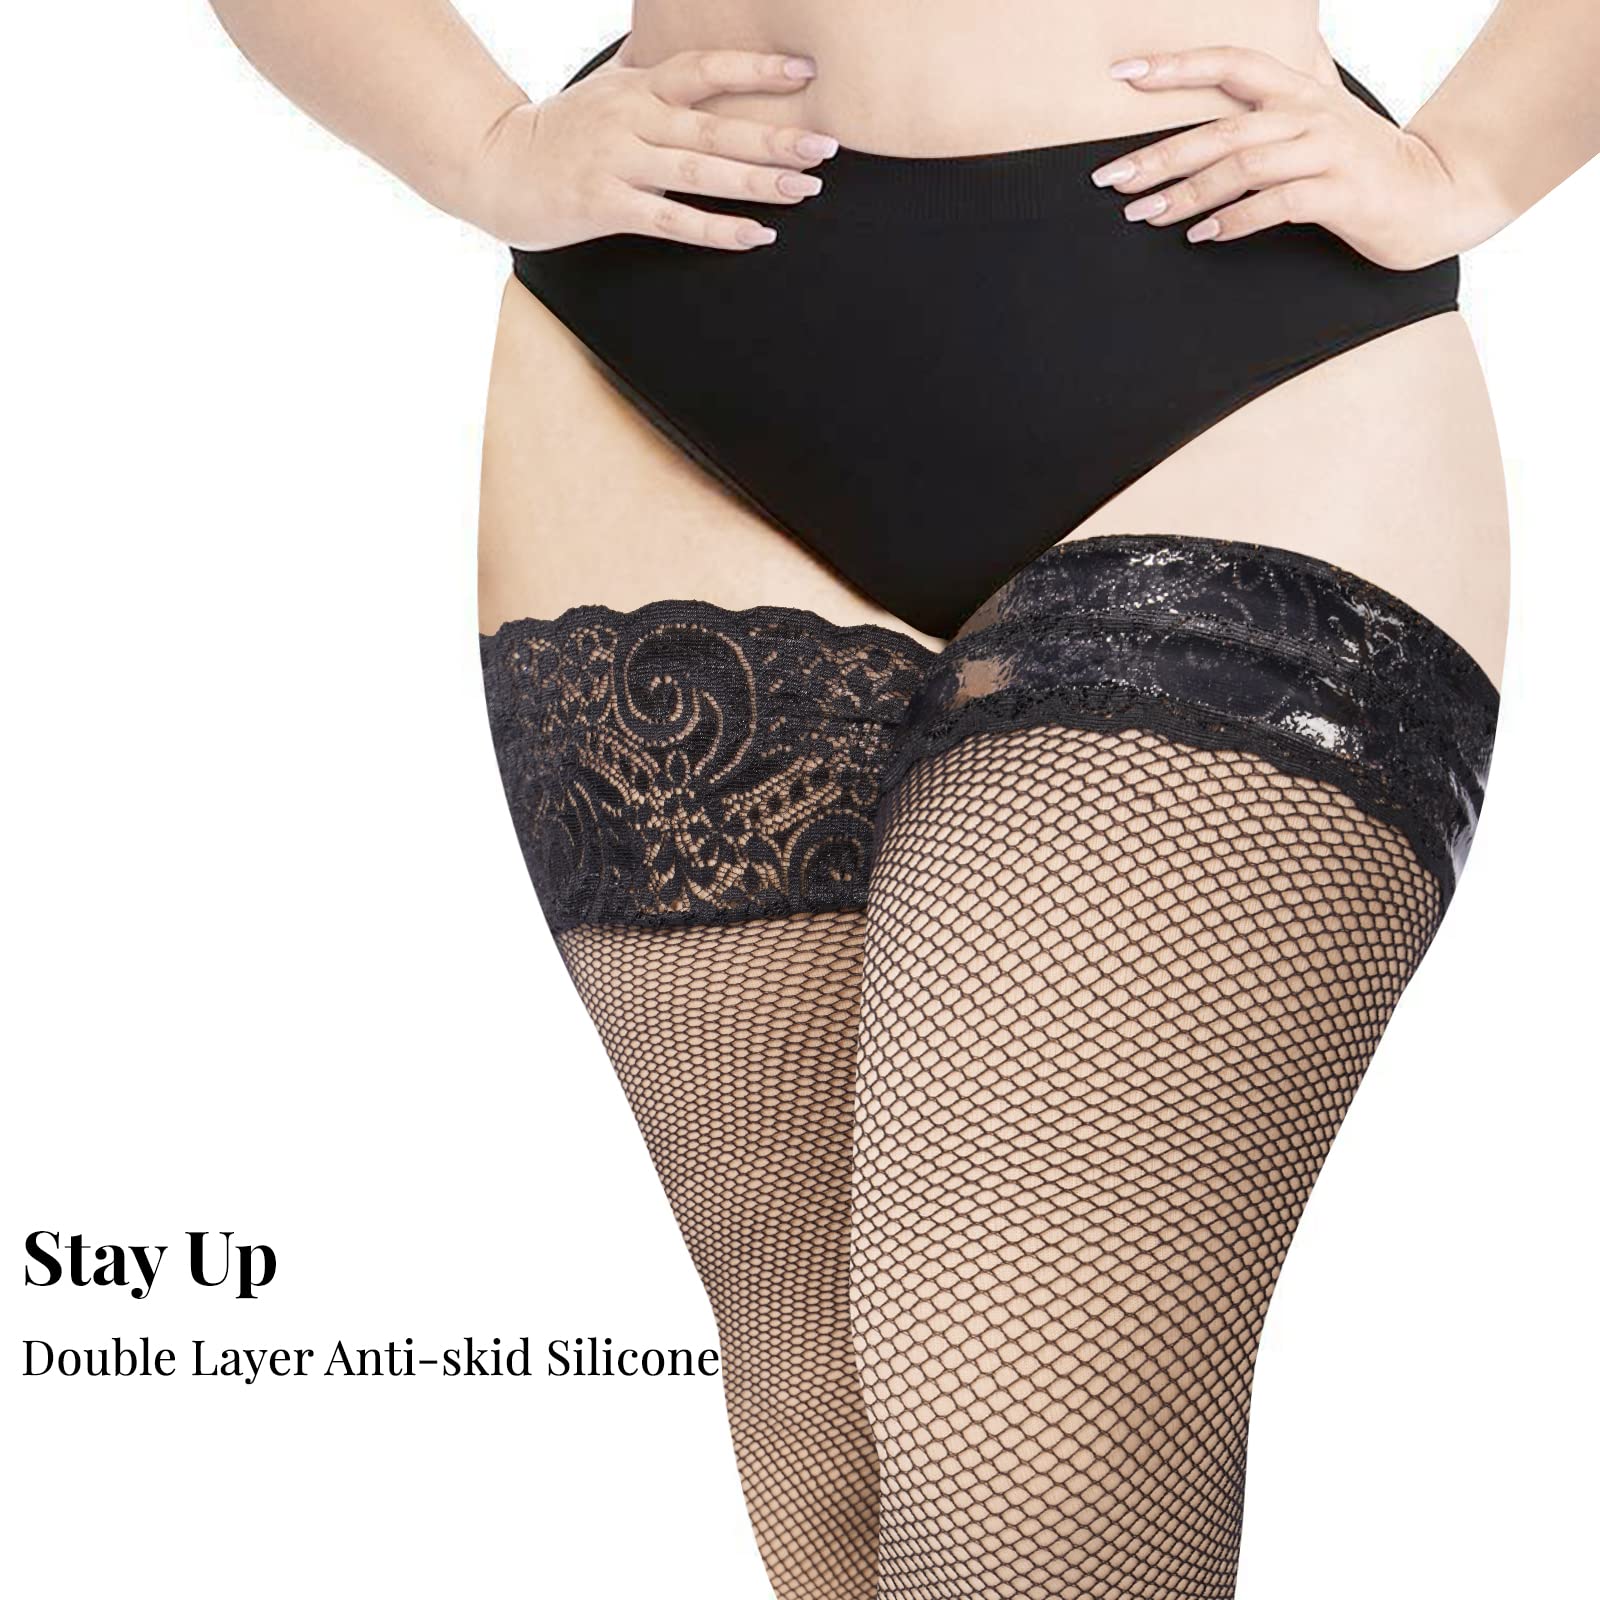 Plus Size Fishnet Stockings Sheer Silicone Lace - Black Small Mesh - Moon Wood